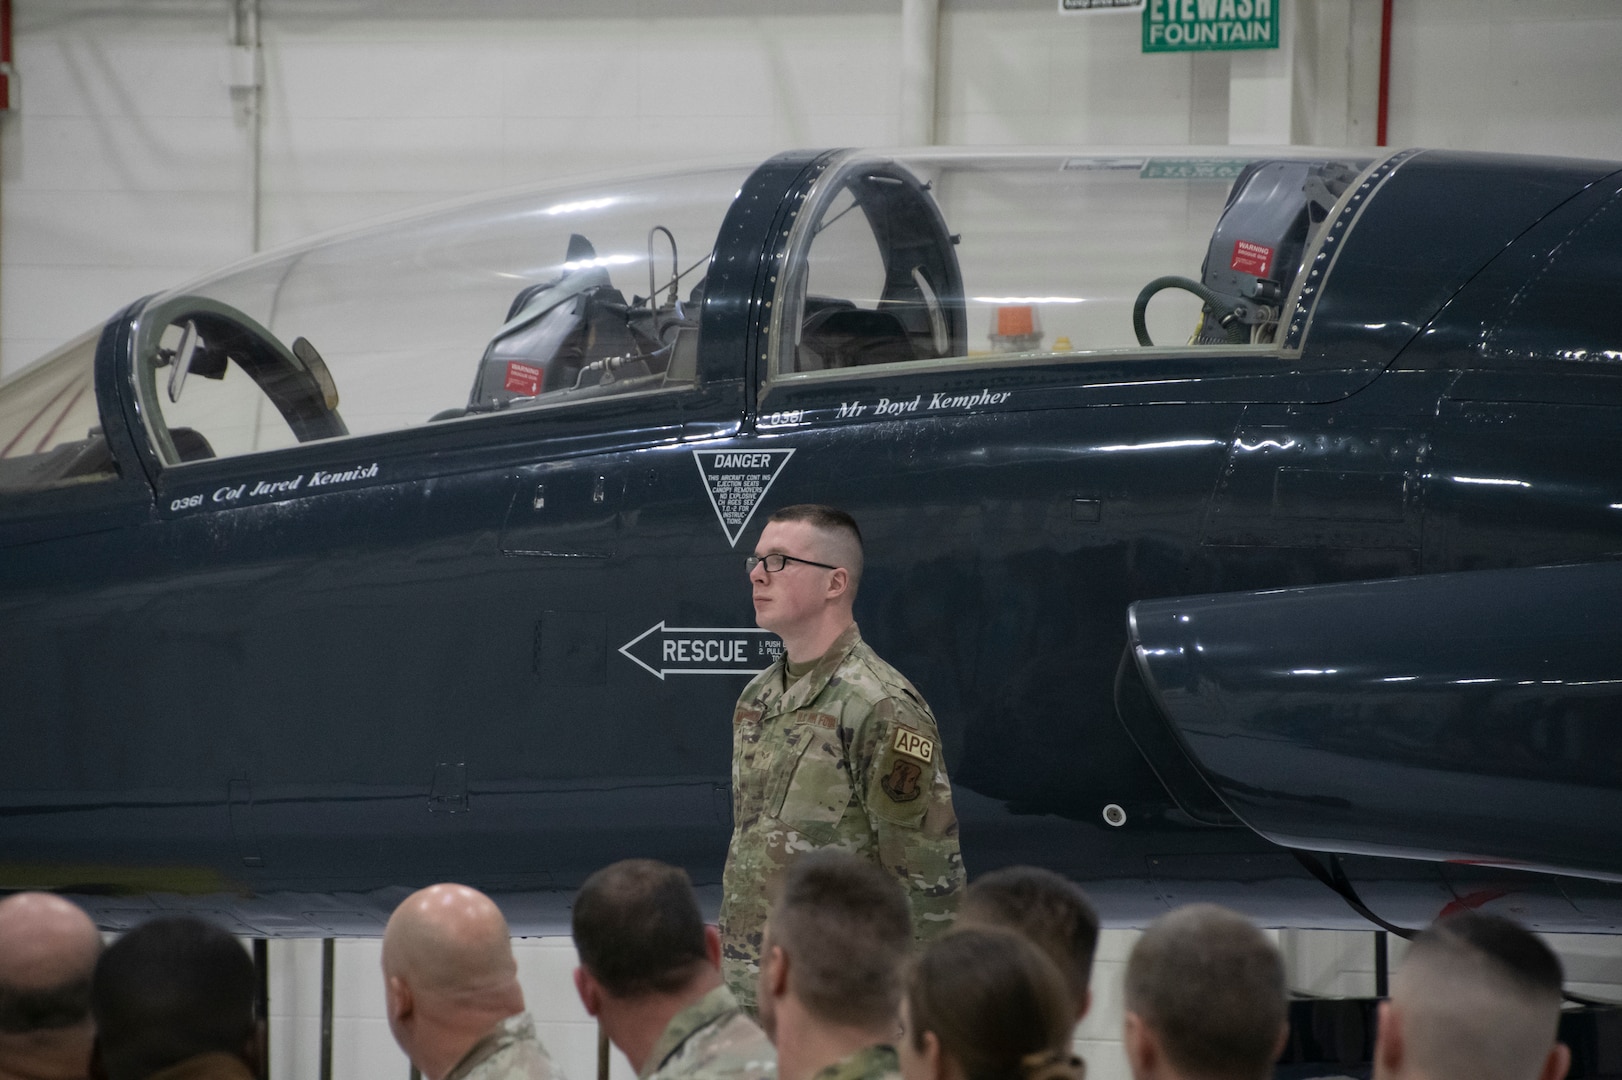 Senior Airman Justin Meinershagen, 131st Bomb Wing maintainer, stands at parade rest after revealing the newly-added name of Col. Jared Kennish to a T-38 Talon trainer jet during a change of command ceremony at Whiteman Air Force Base, Missouri, Feb. 3, 2023. During the ceremony Col. Jared P. Kennish assumed command of the 131st Bomb Wing from Col. Matthew D. Calhoun. (U.S. Air National Guard photo by Senior Airman Kelly C. Ferguson)